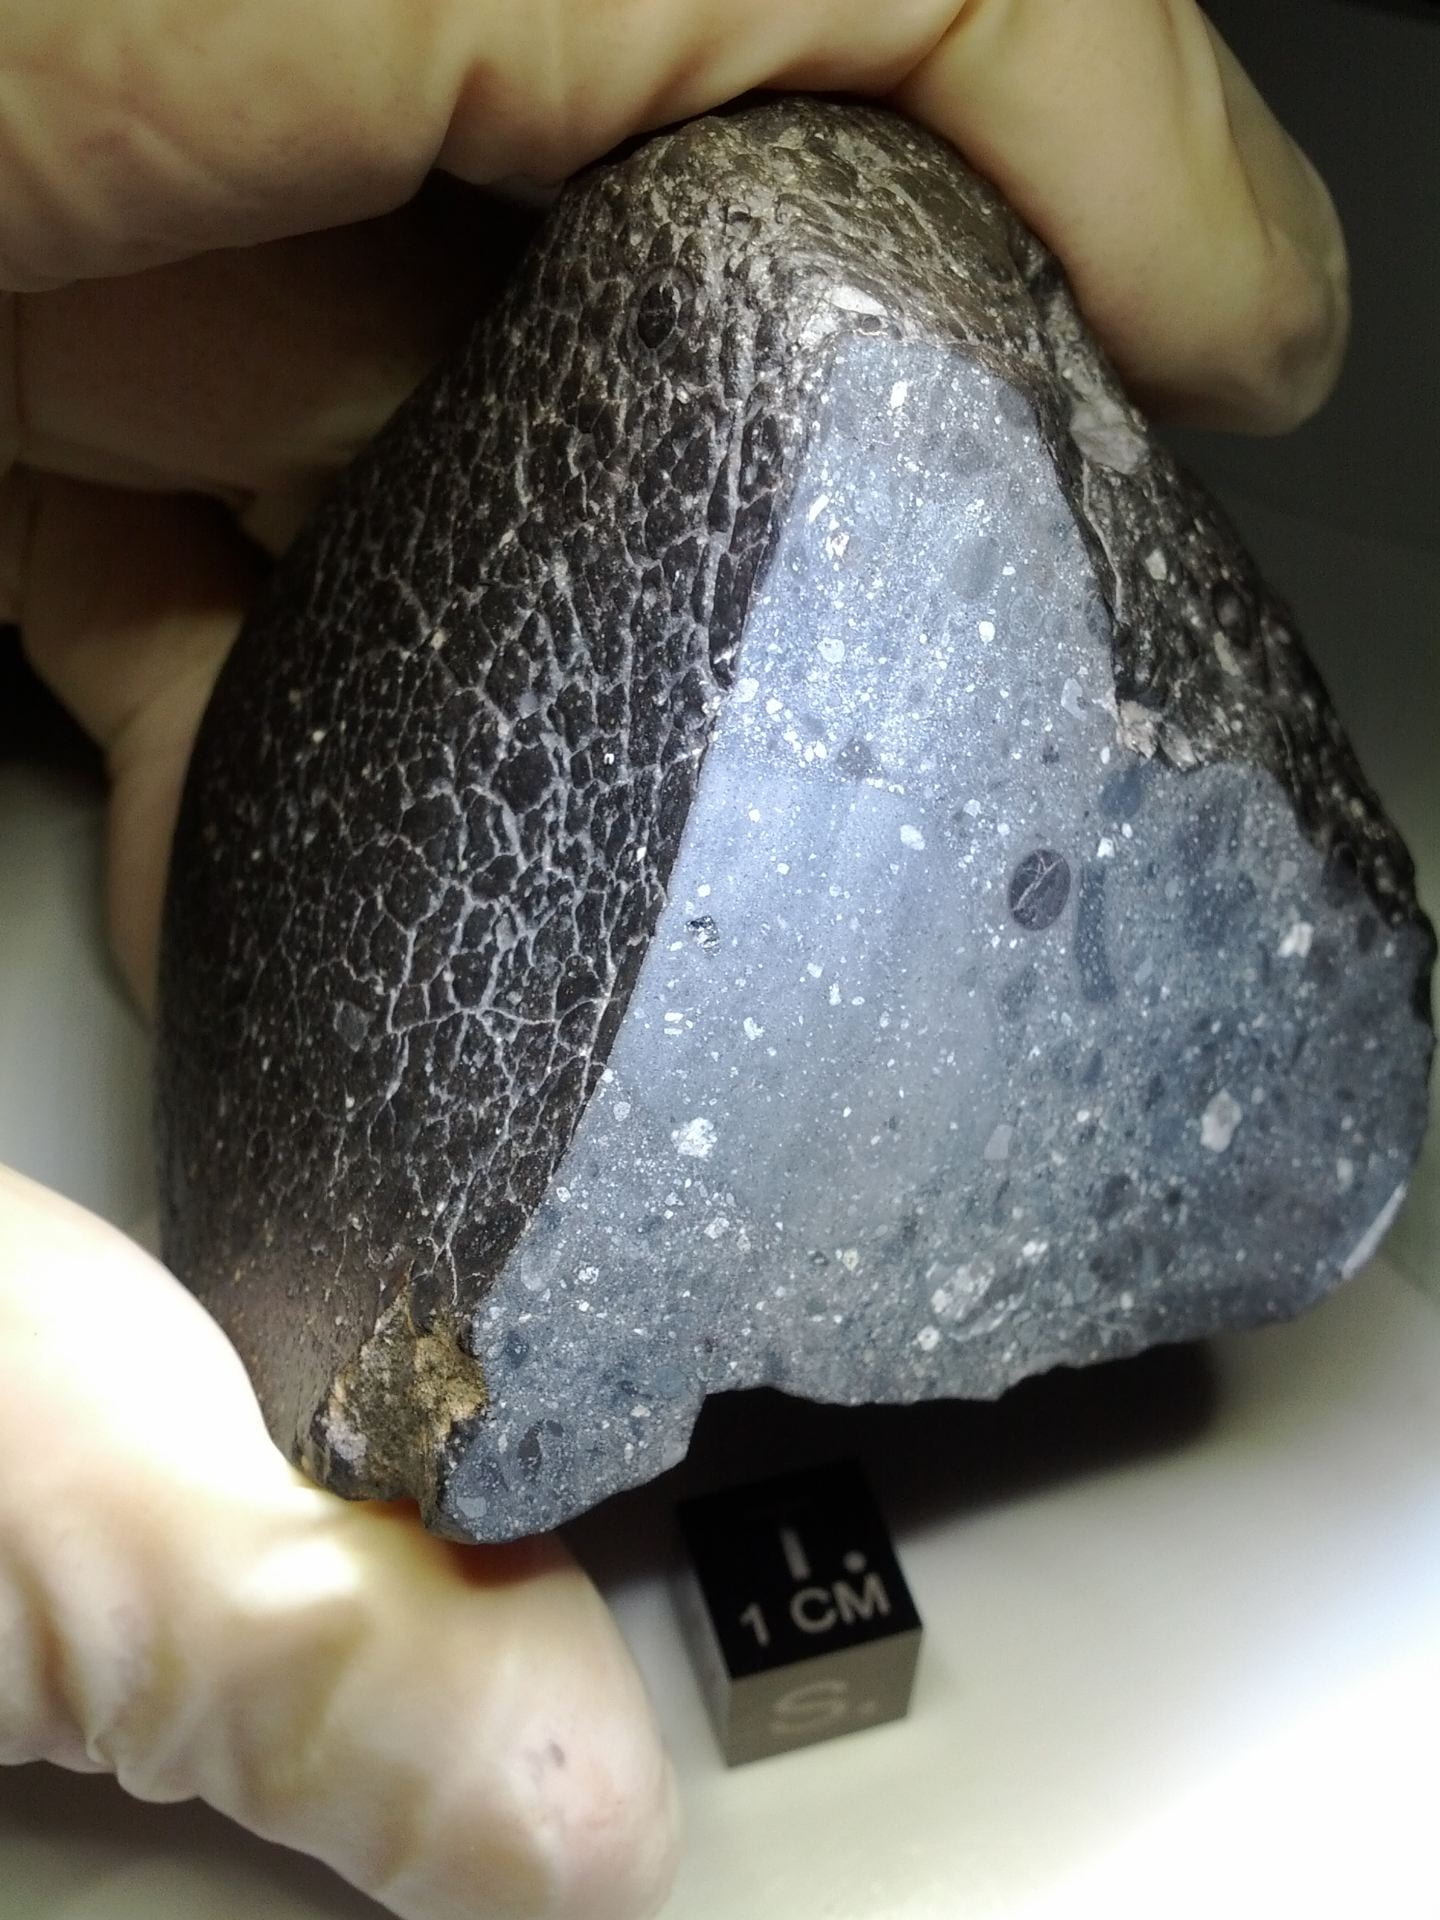 A black, slightly shiny rock is held next to a measuring block to show that the meteorite is only about 5 centimeters across.